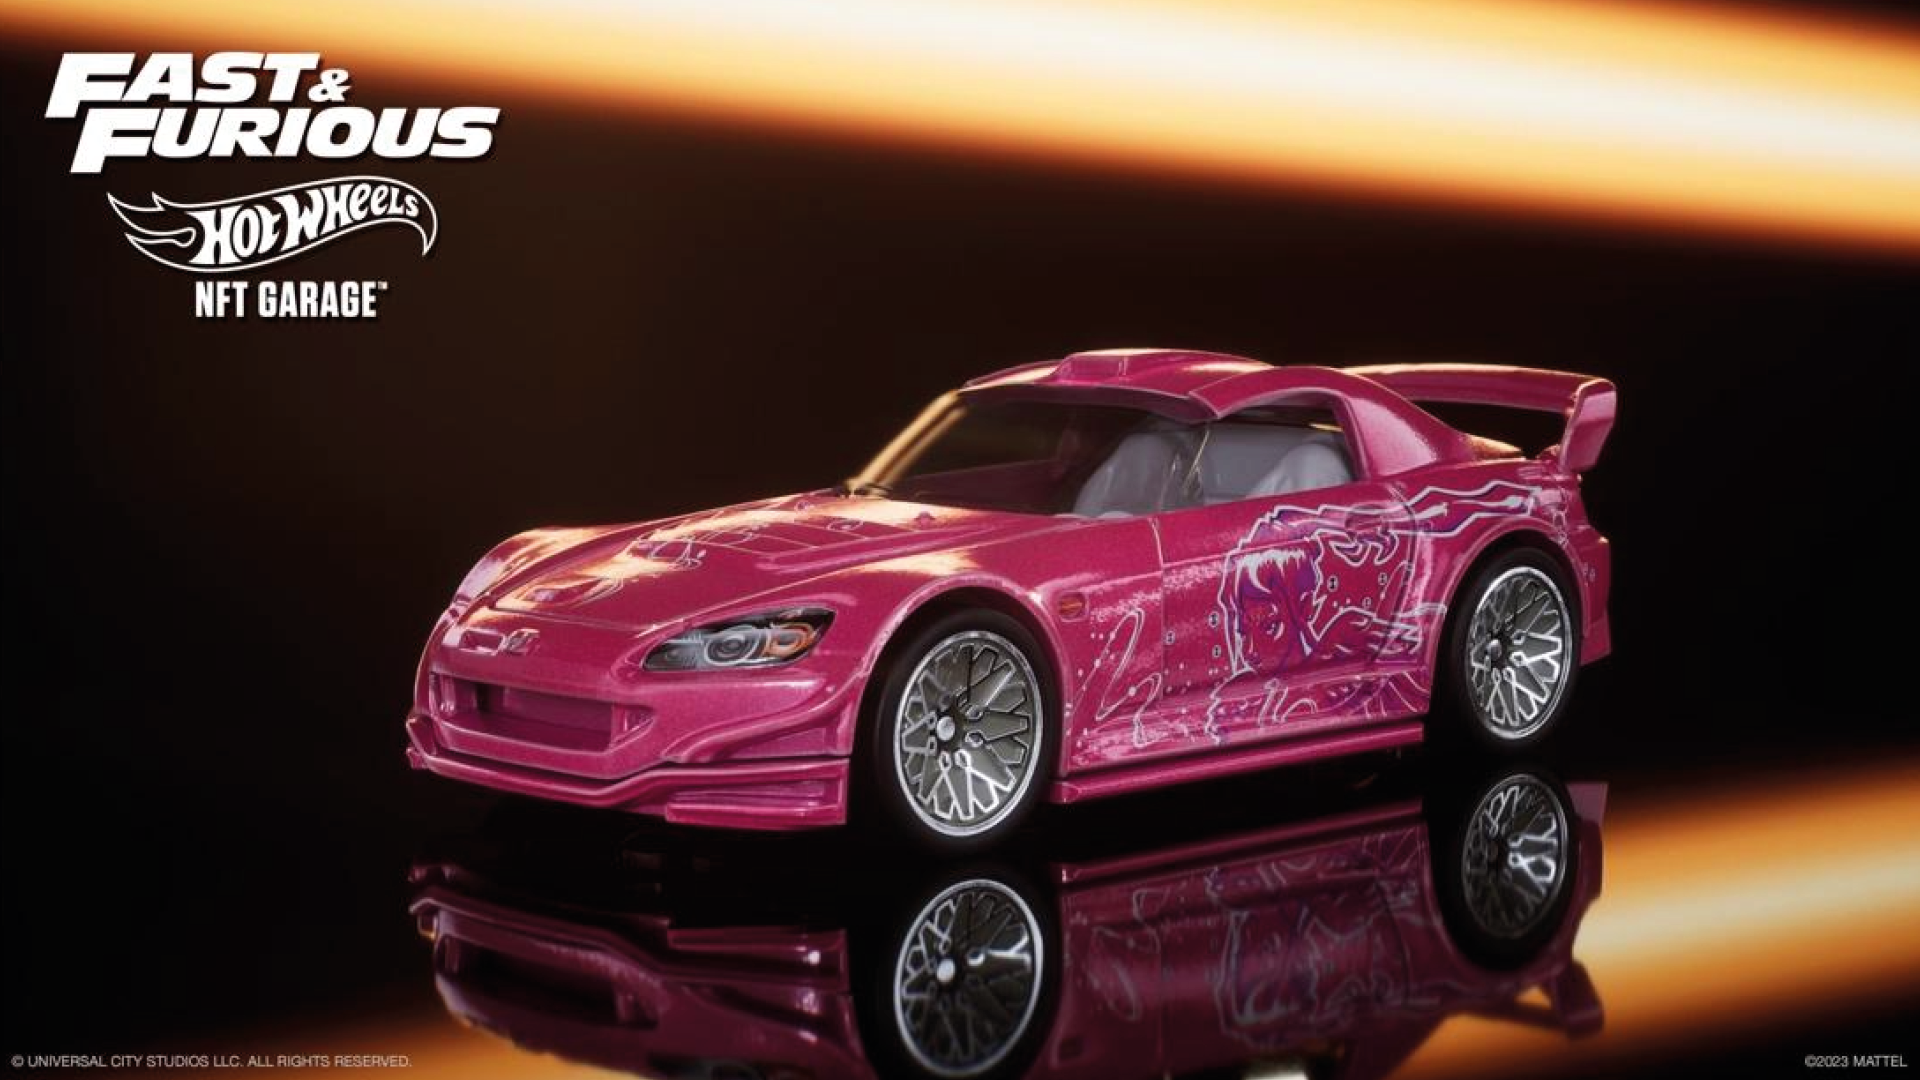 Diecast Movie & TV Cars - Fast & Furious Cars - Page 1